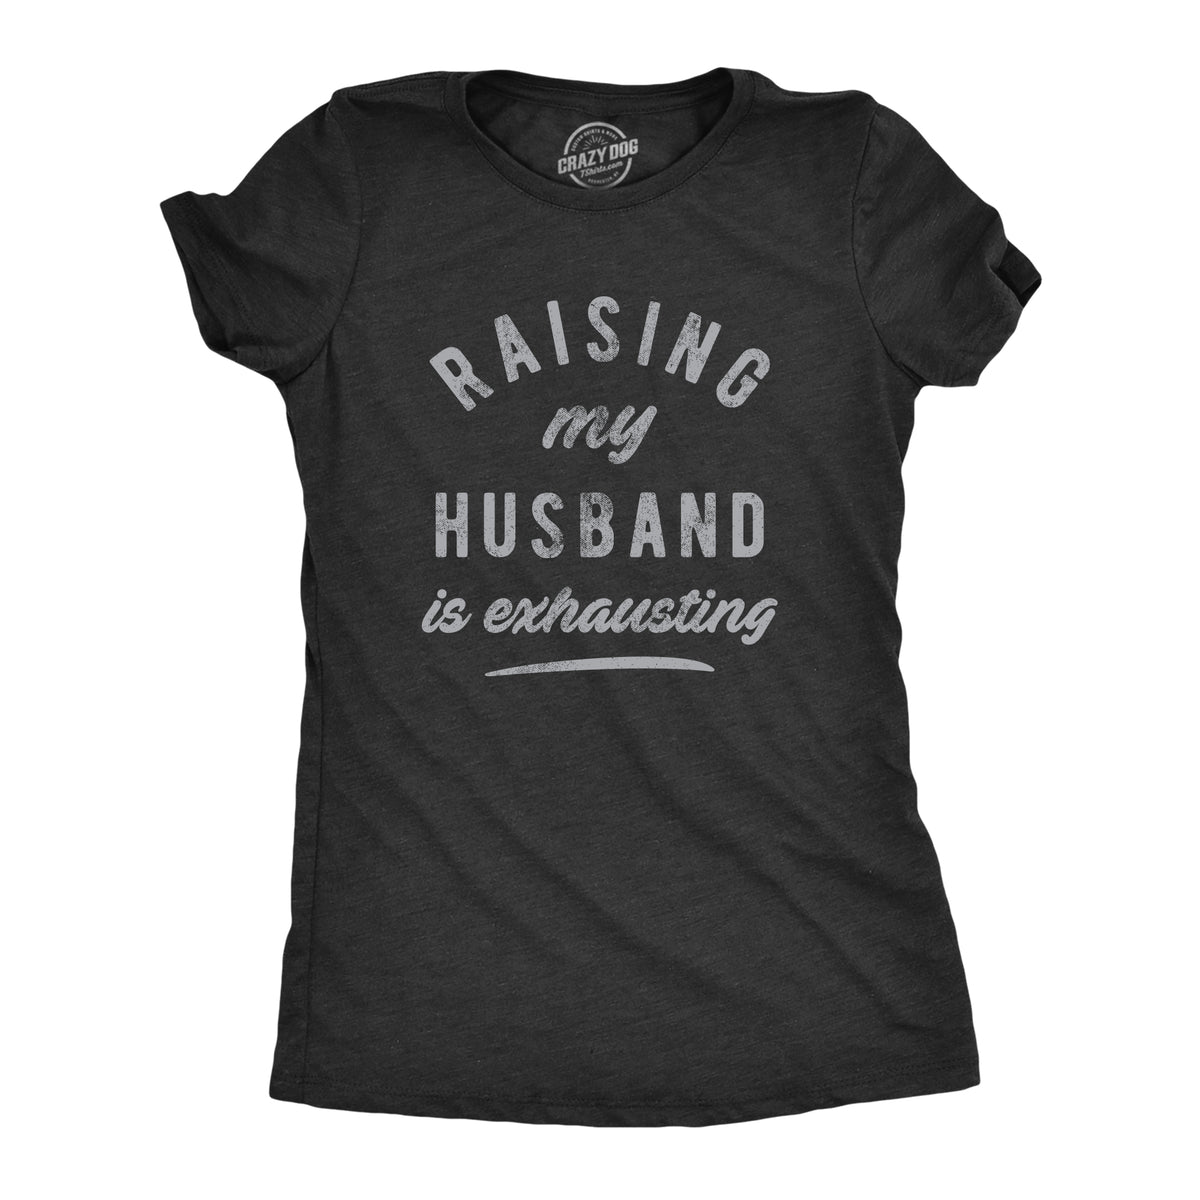 Funny Heather Black Raising My Husband Is Exhausting Womens T Shirt Nerdy Mother&#39;s Day Sarcastic Tee